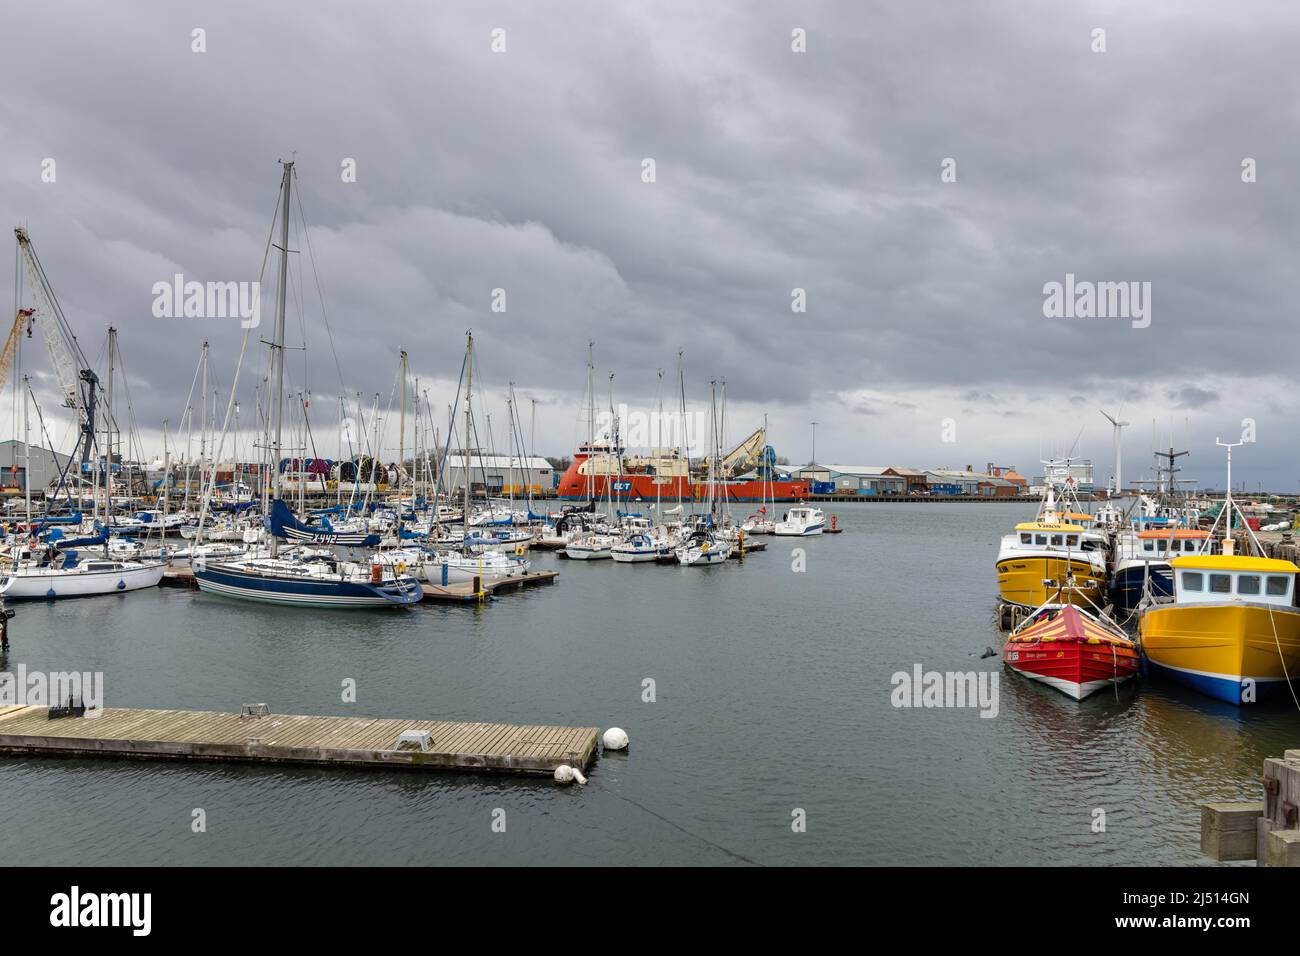 South Harbour and Yacht Club, Blyth, Northumberland, England. Stock Photo